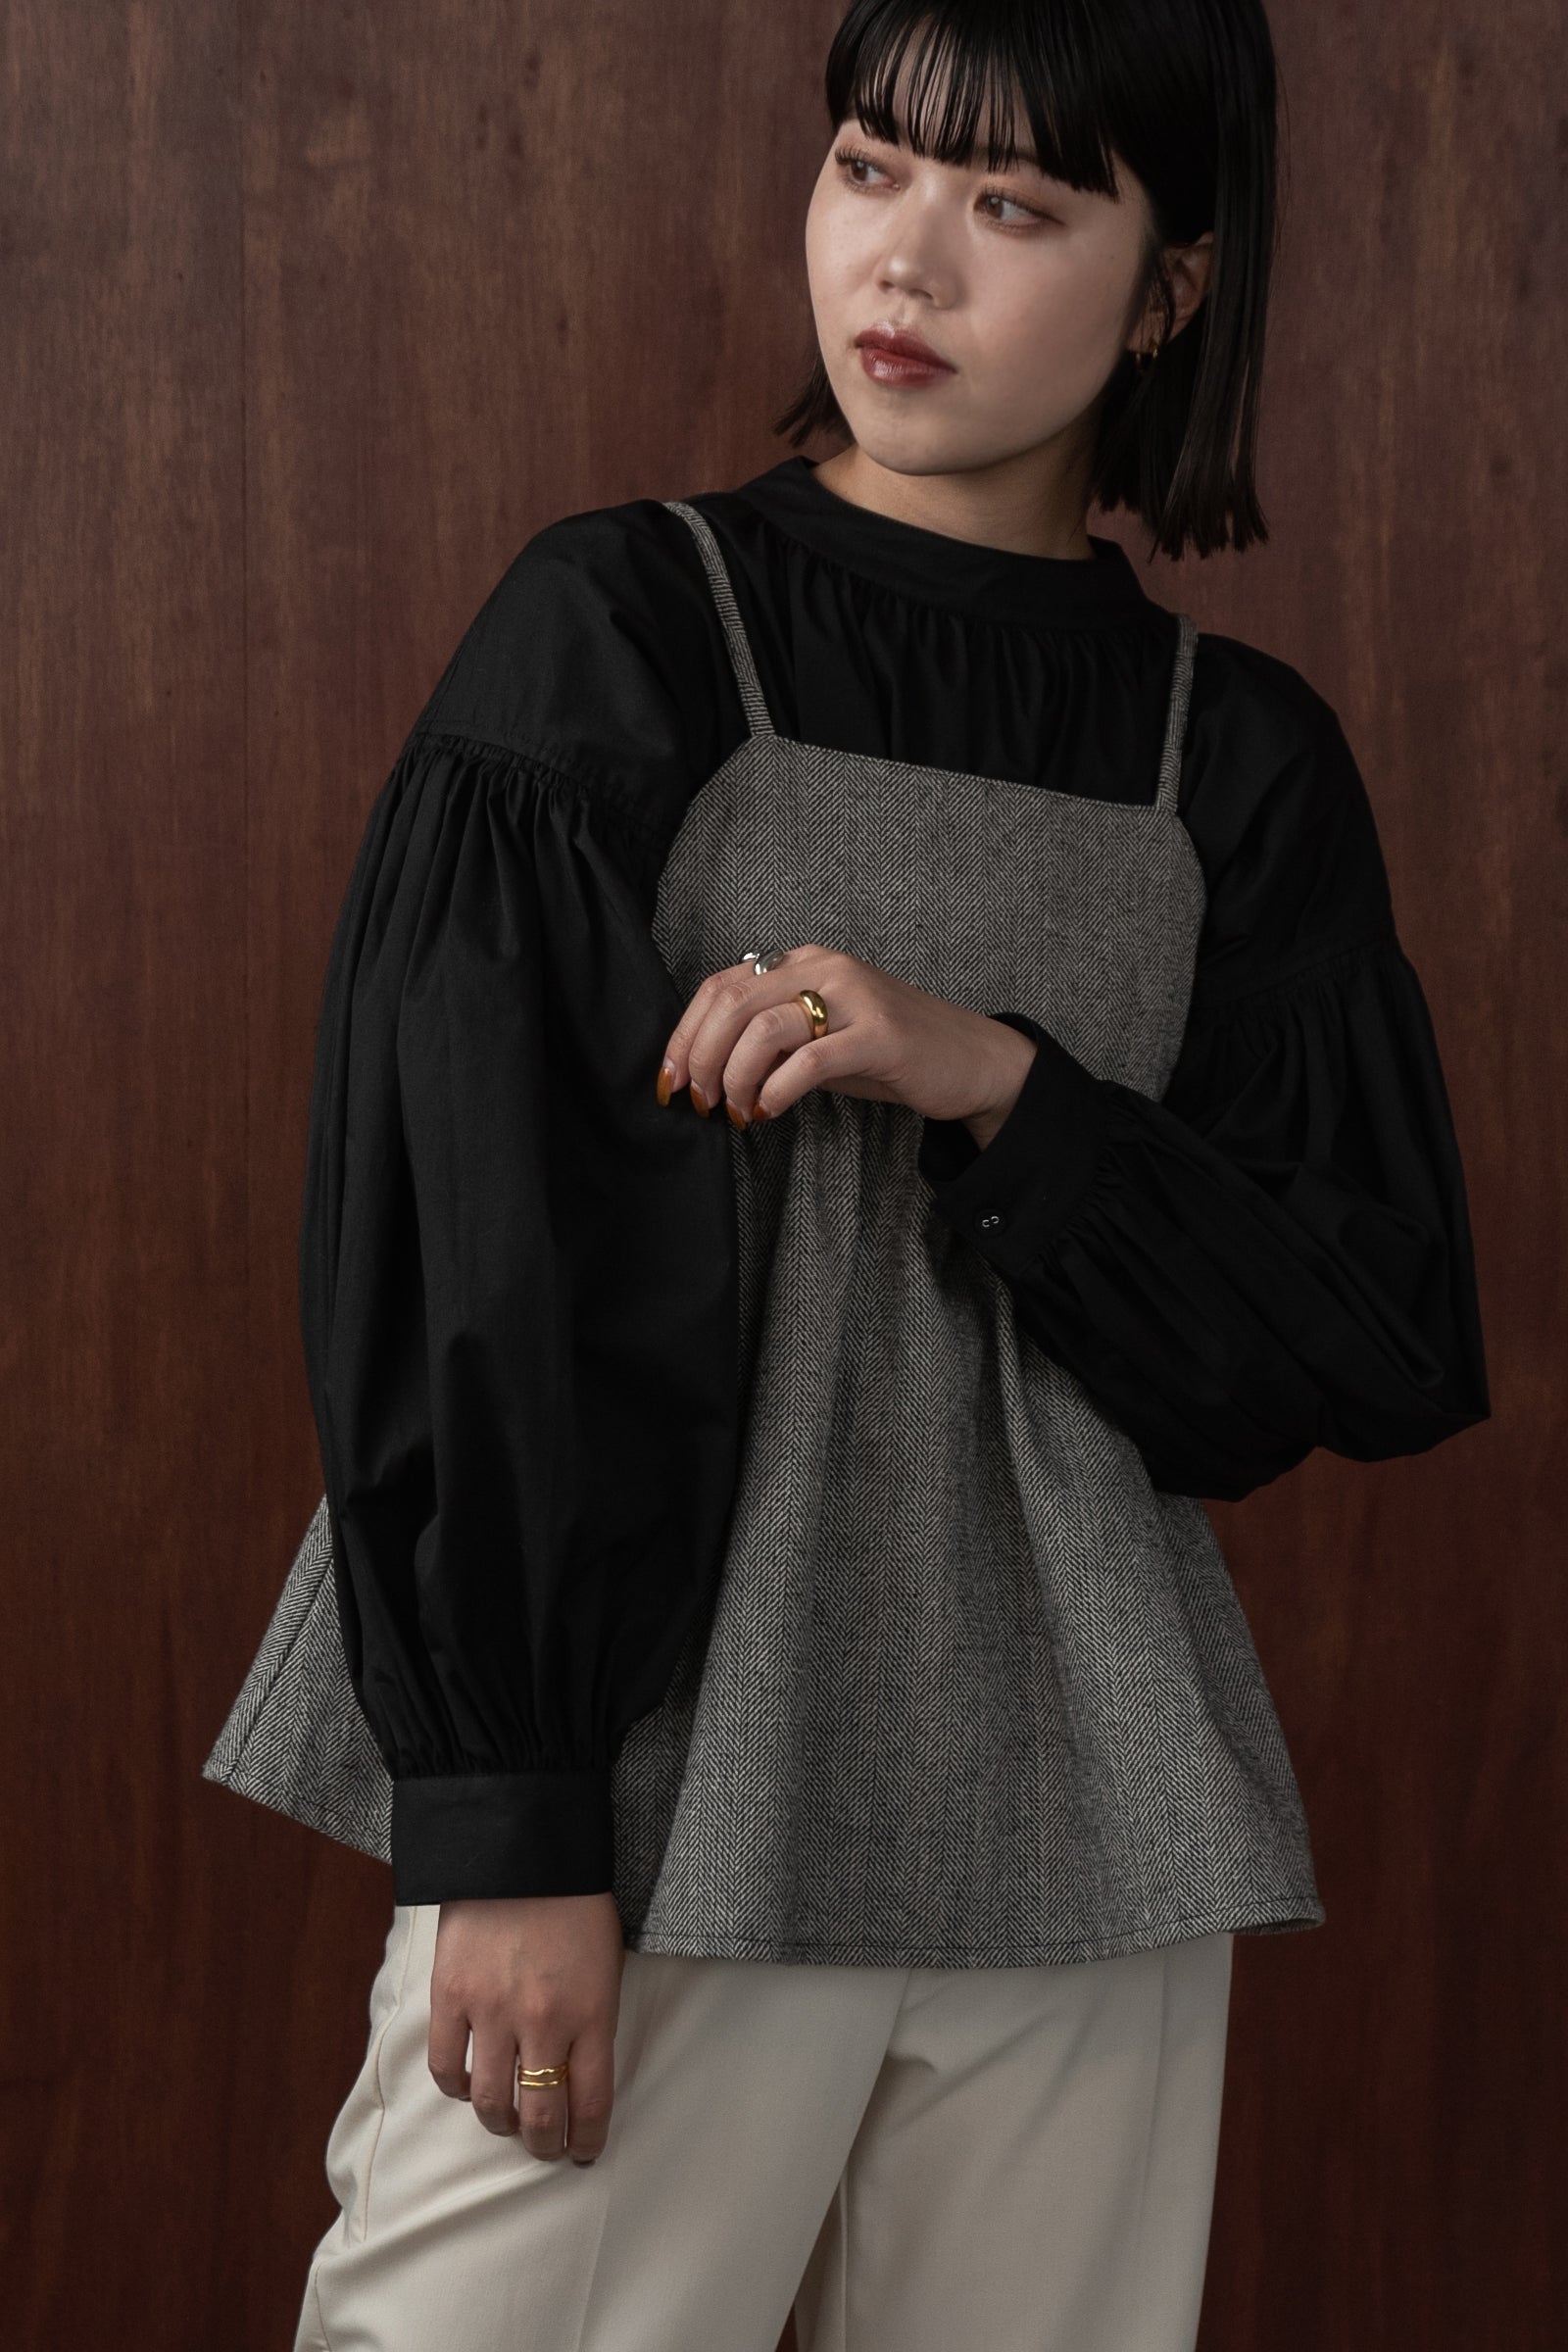 Volume Gather Blouse L'Or